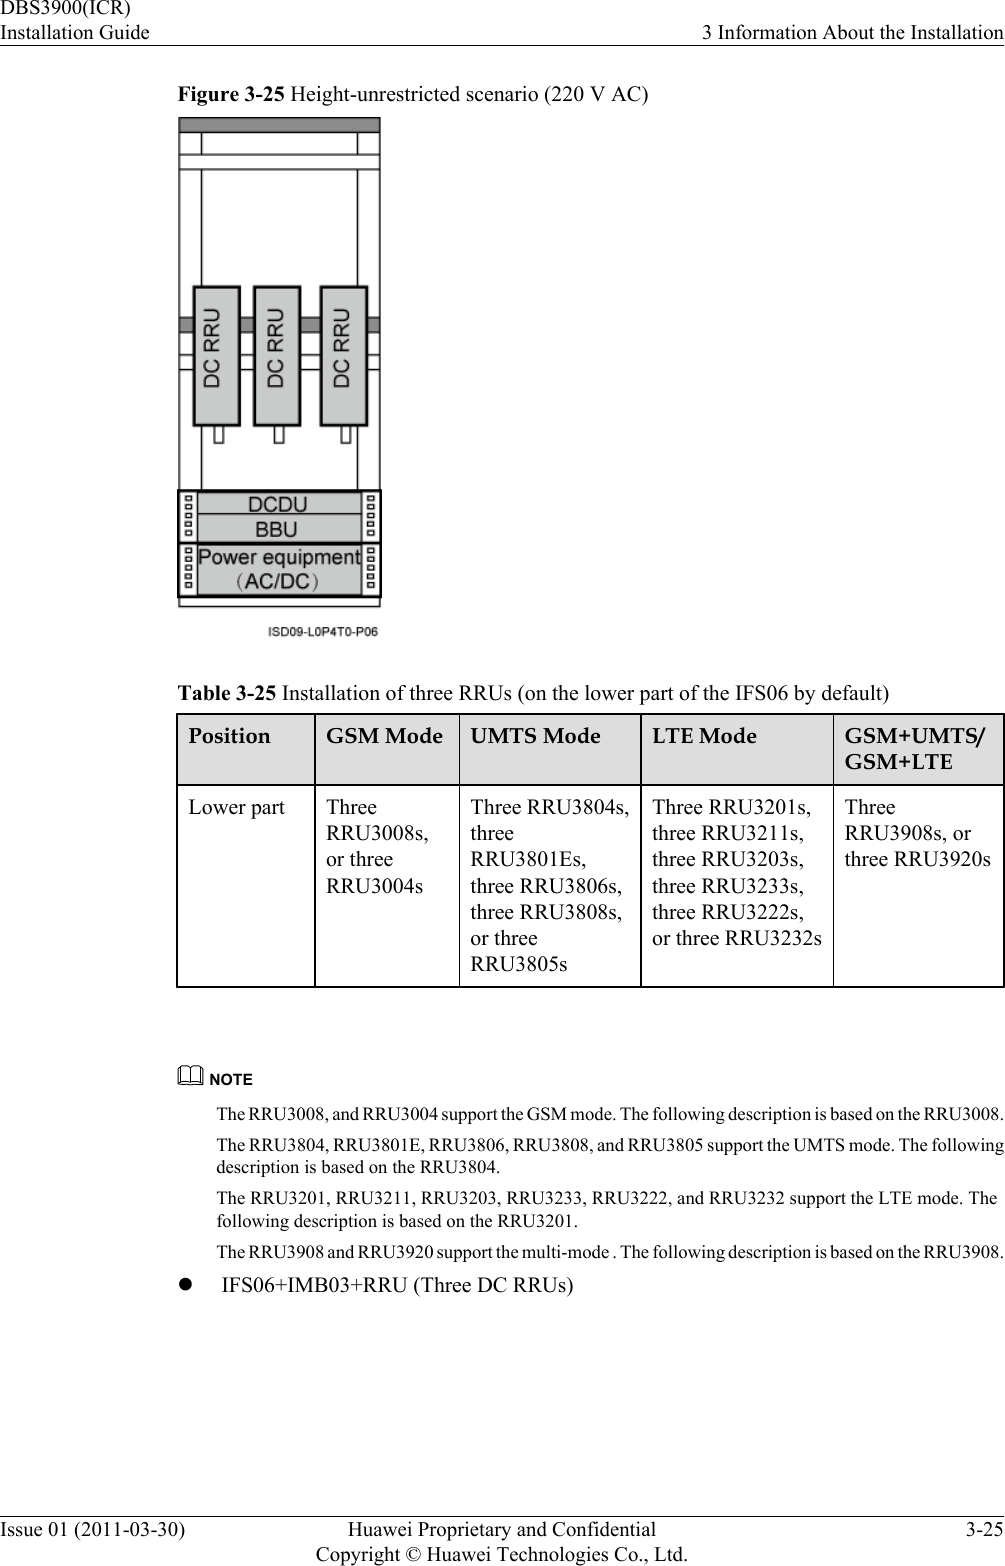 Figure 3-25 Height-unrestricted scenario (220 V AC)Table 3-25 Installation of three RRUs (on the lower part of the IFS06 by default)Position GSM Mode UMTS Mode LTE Mode GSM+UMTS/GSM+LTELower part ThreeRRU3008s,or threeRRU3004sThree RRU3804s,threeRRU3801Es,three RRU3806s,three RRU3808s,or threeRRU3805sThree RRU3201s,three RRU3211s,three RRU3203s,three RRU3233s,three RRU3222s,or three RRU3232sThreeRRU3908s, orthree RRU3920s NOTEThe RRU3008, and RRU3004 support the GSM mode. The following description is based on the RRU3008.The RRU3804, RRU3801E, RRU3806, RRU3808, and RRU3805 support the UMTS mode. The followingdescription is based on the RRU3804.The RRU3201, RRU3211, RRU3203, RRU3233, RRU3222, and RRU3232 support the LTE mode. Thefollowing description is based on the RRU3201.The RRU3908 and RRU3920 support the multi-mode . The following description is based on the RRU3908.lIFS06+IMB03+RRU (Three DC RRUs)DBS3900(ICR)Installation Guide 3 Information About the InstallationIssue 01 (2011-03-30) Huawei Proprietary and ConfidentialCopyright © Huawei Technologies Co., Ltd.3-25